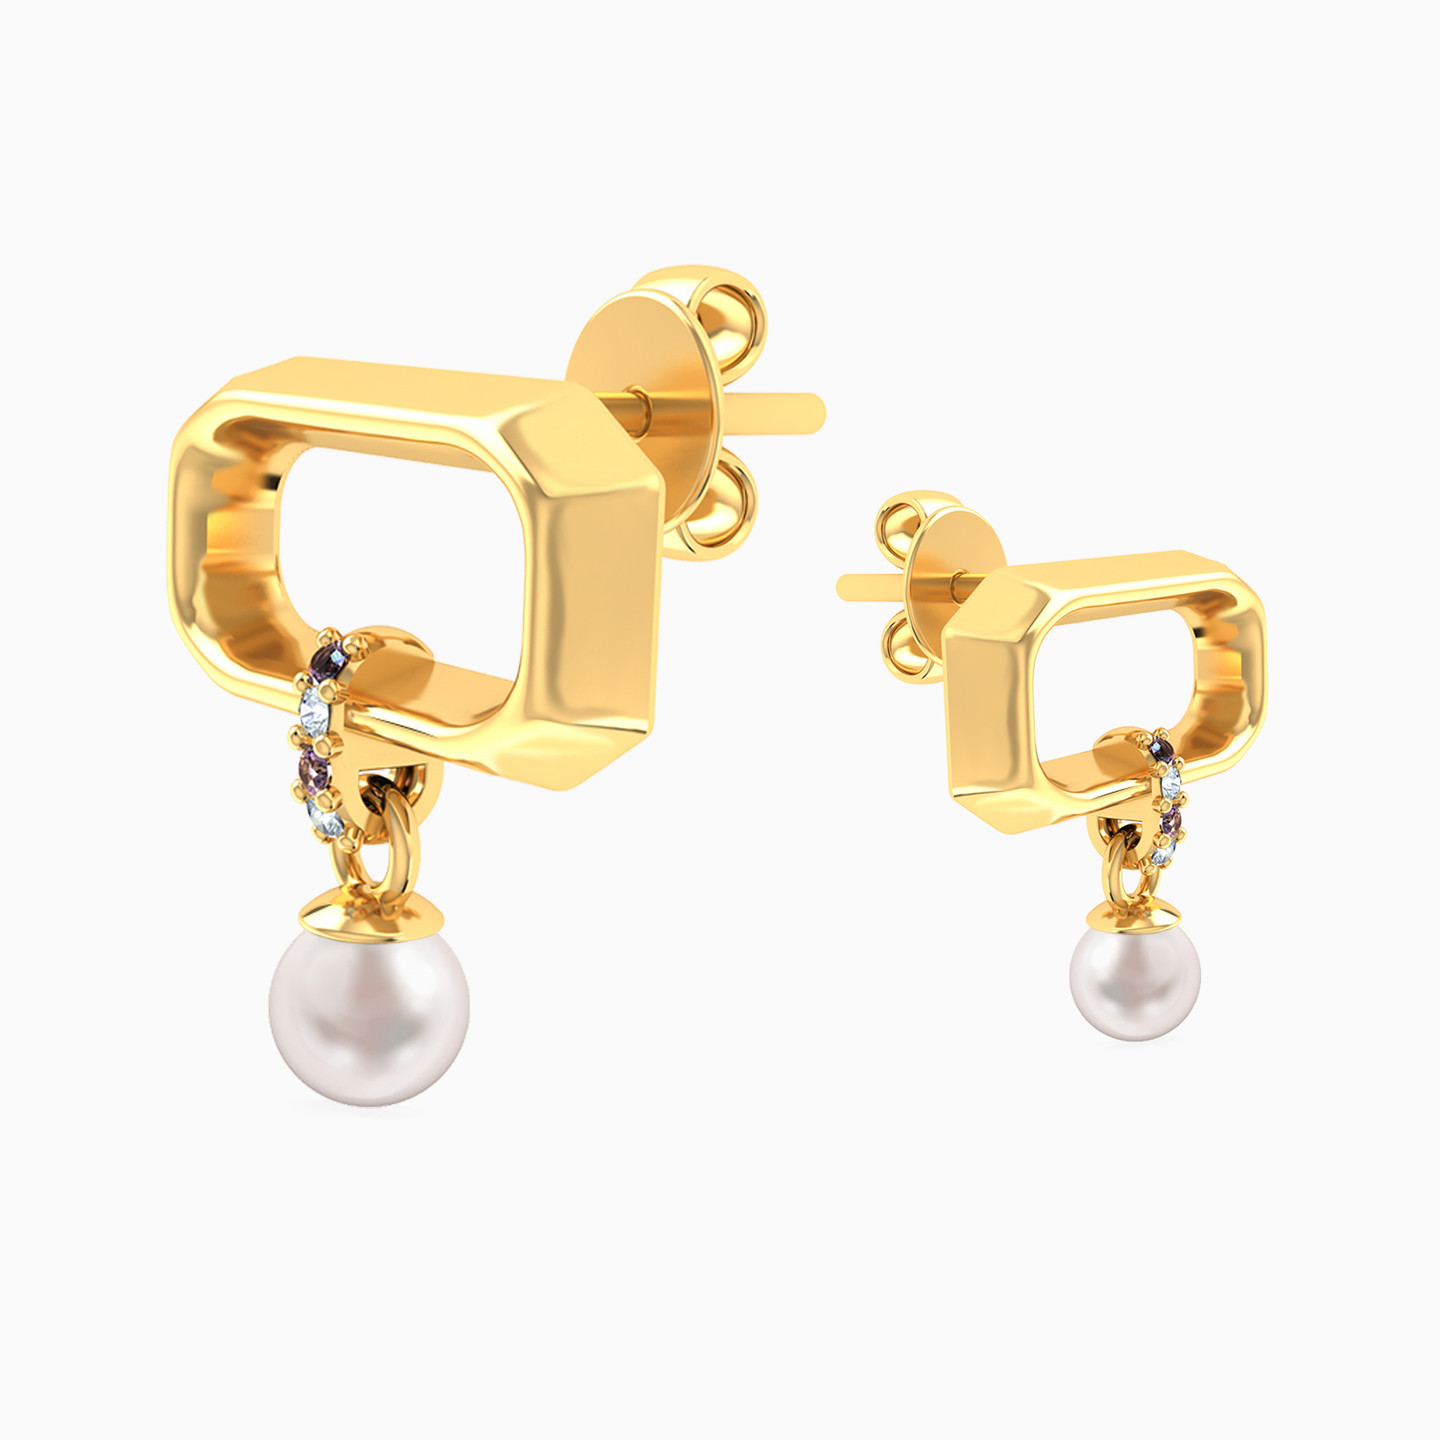 Rectangle Shaped Pearls & Colored Stones Drop Earrings in 18K Gold - 3